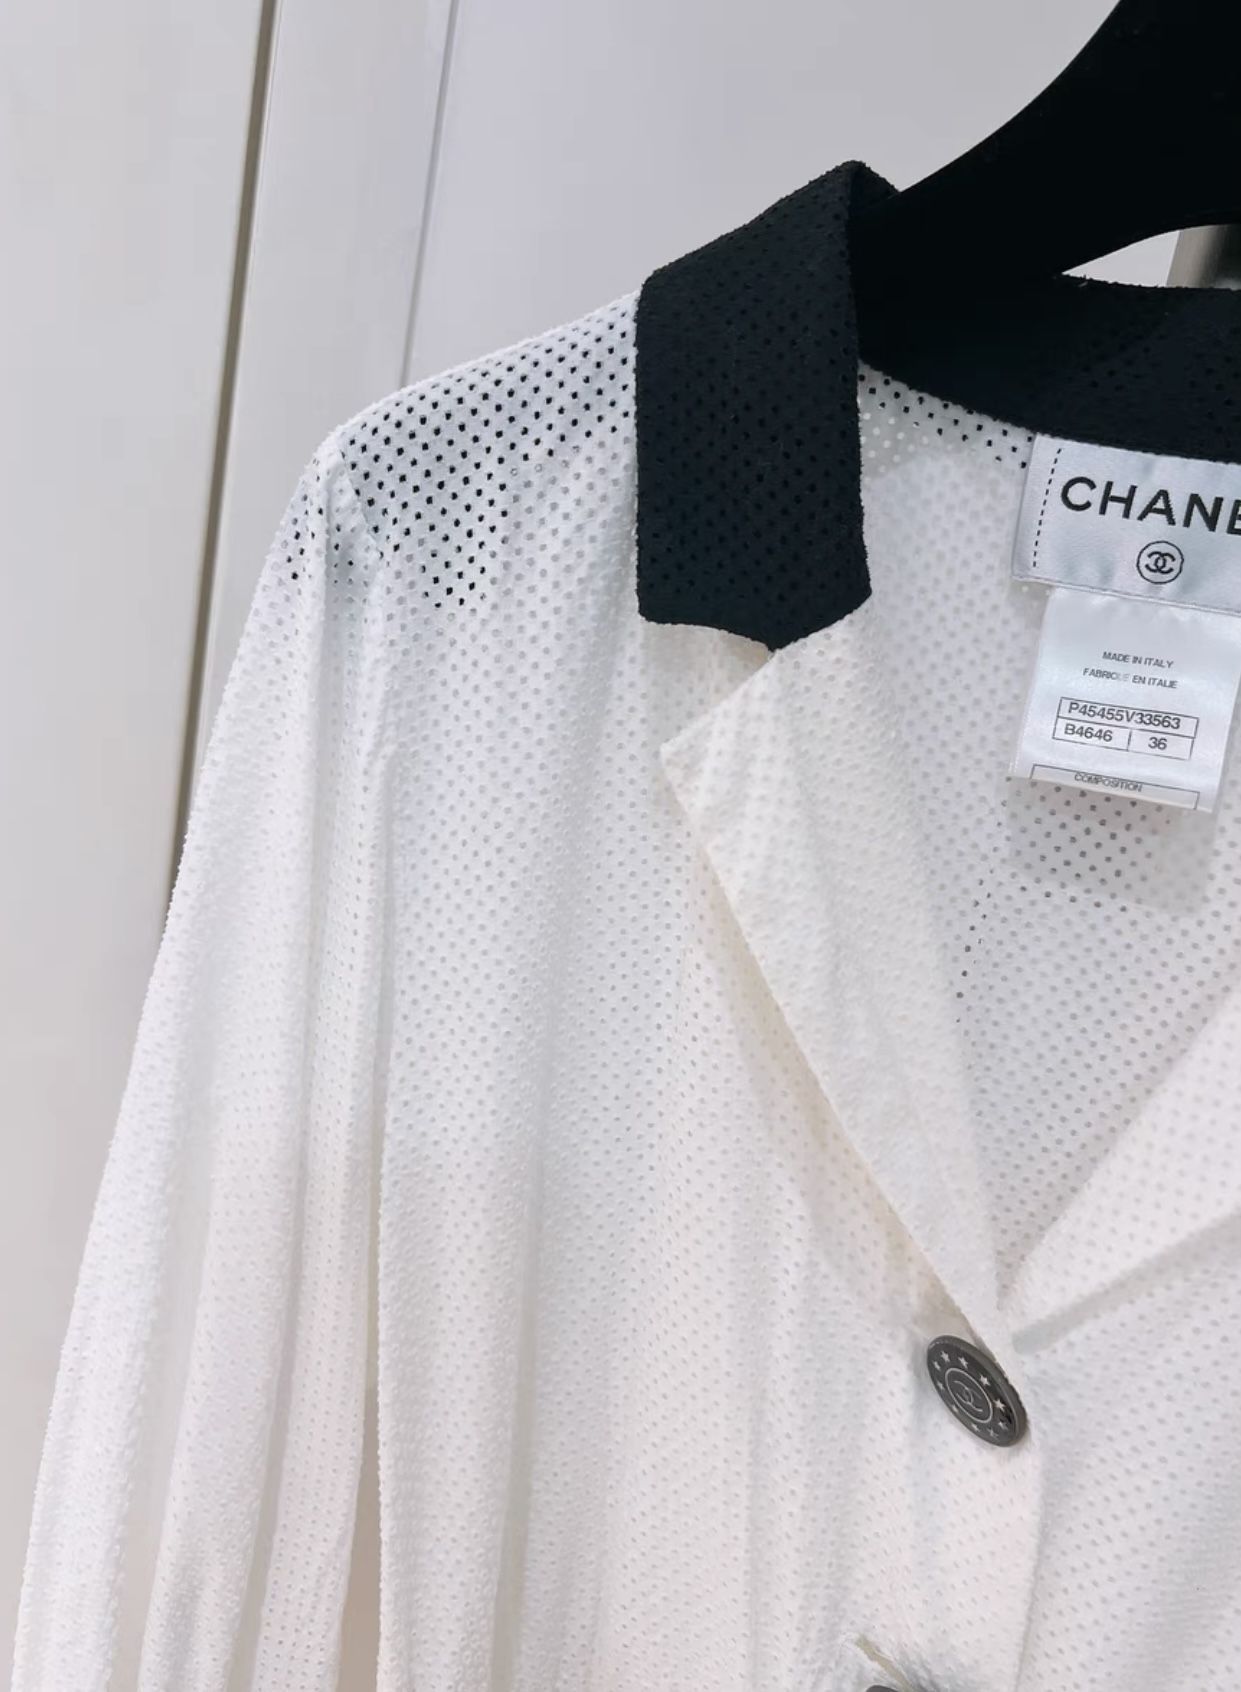 CHANEL 2019 19S Chanel by the Sea Runway 'CHA NEL' White Shirt 34